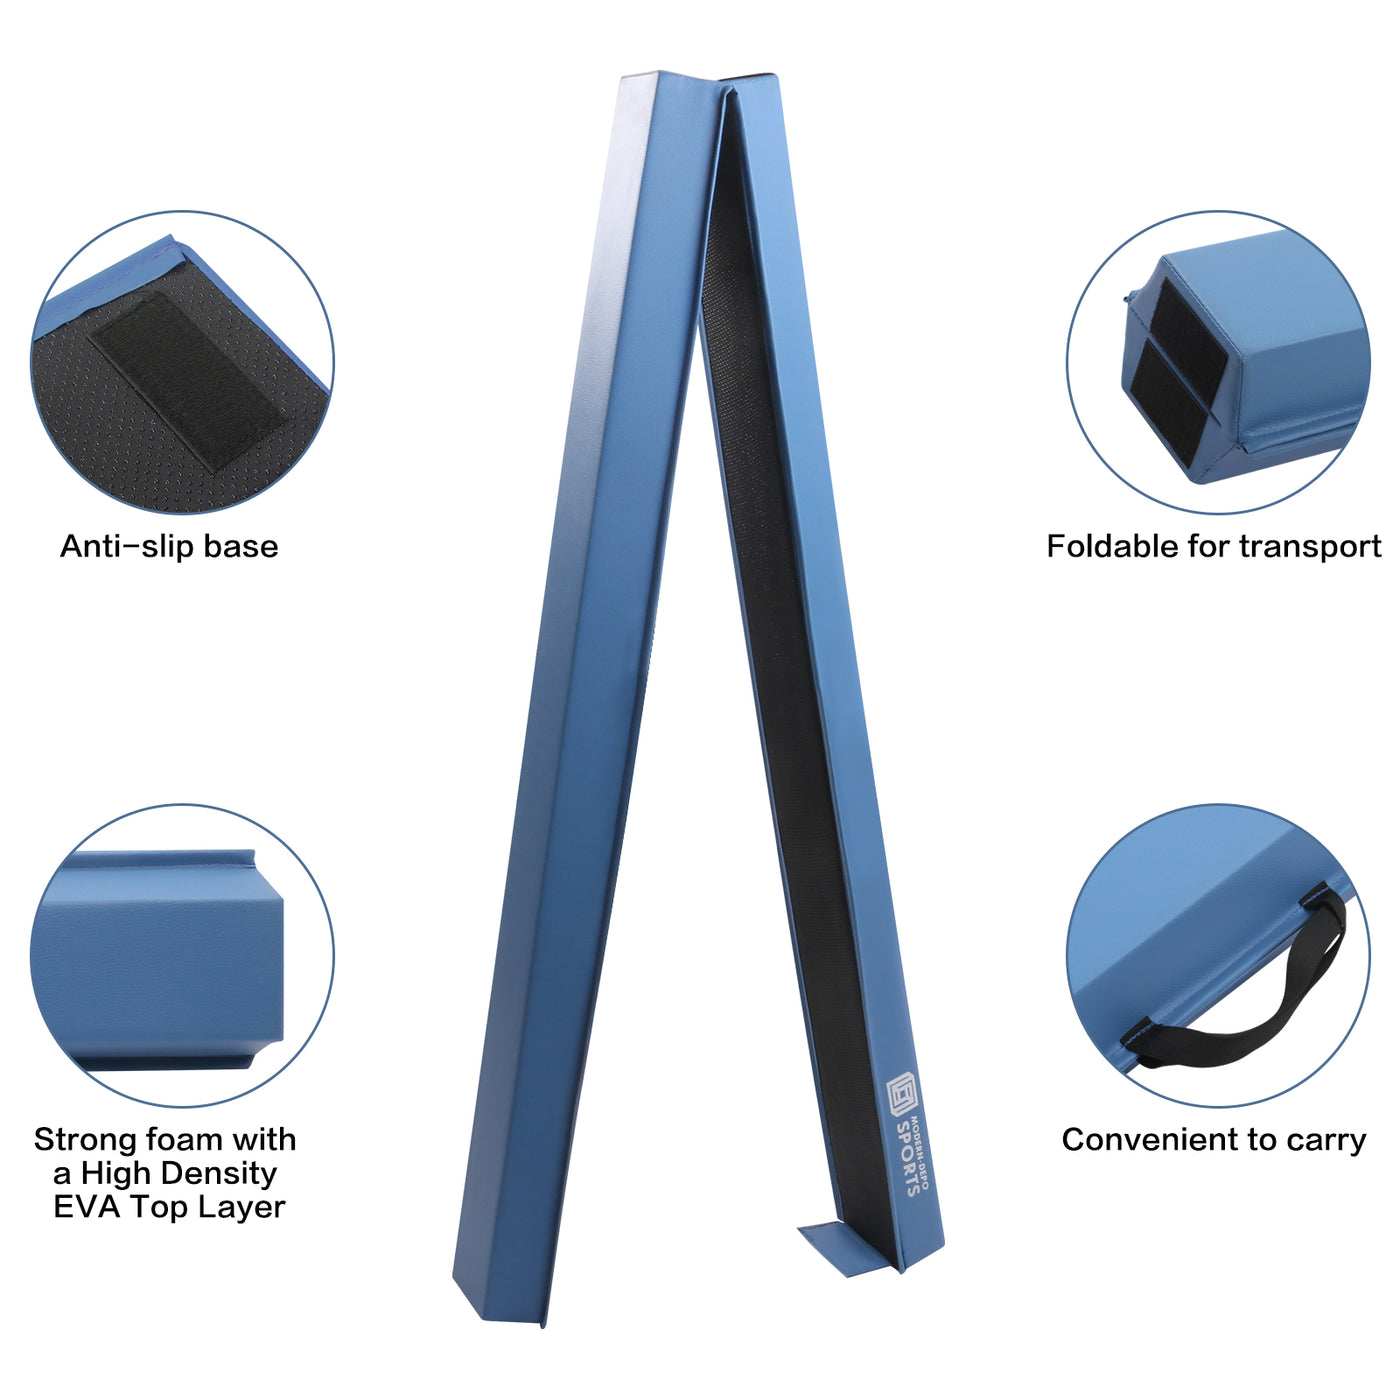 6 Ft / 8 Ft Folding Balance Beam Anti-slip Walking Beam for Kids | Balance Training Gymnastics Equipment for Practice, Physical Therapy and Professional Home Training